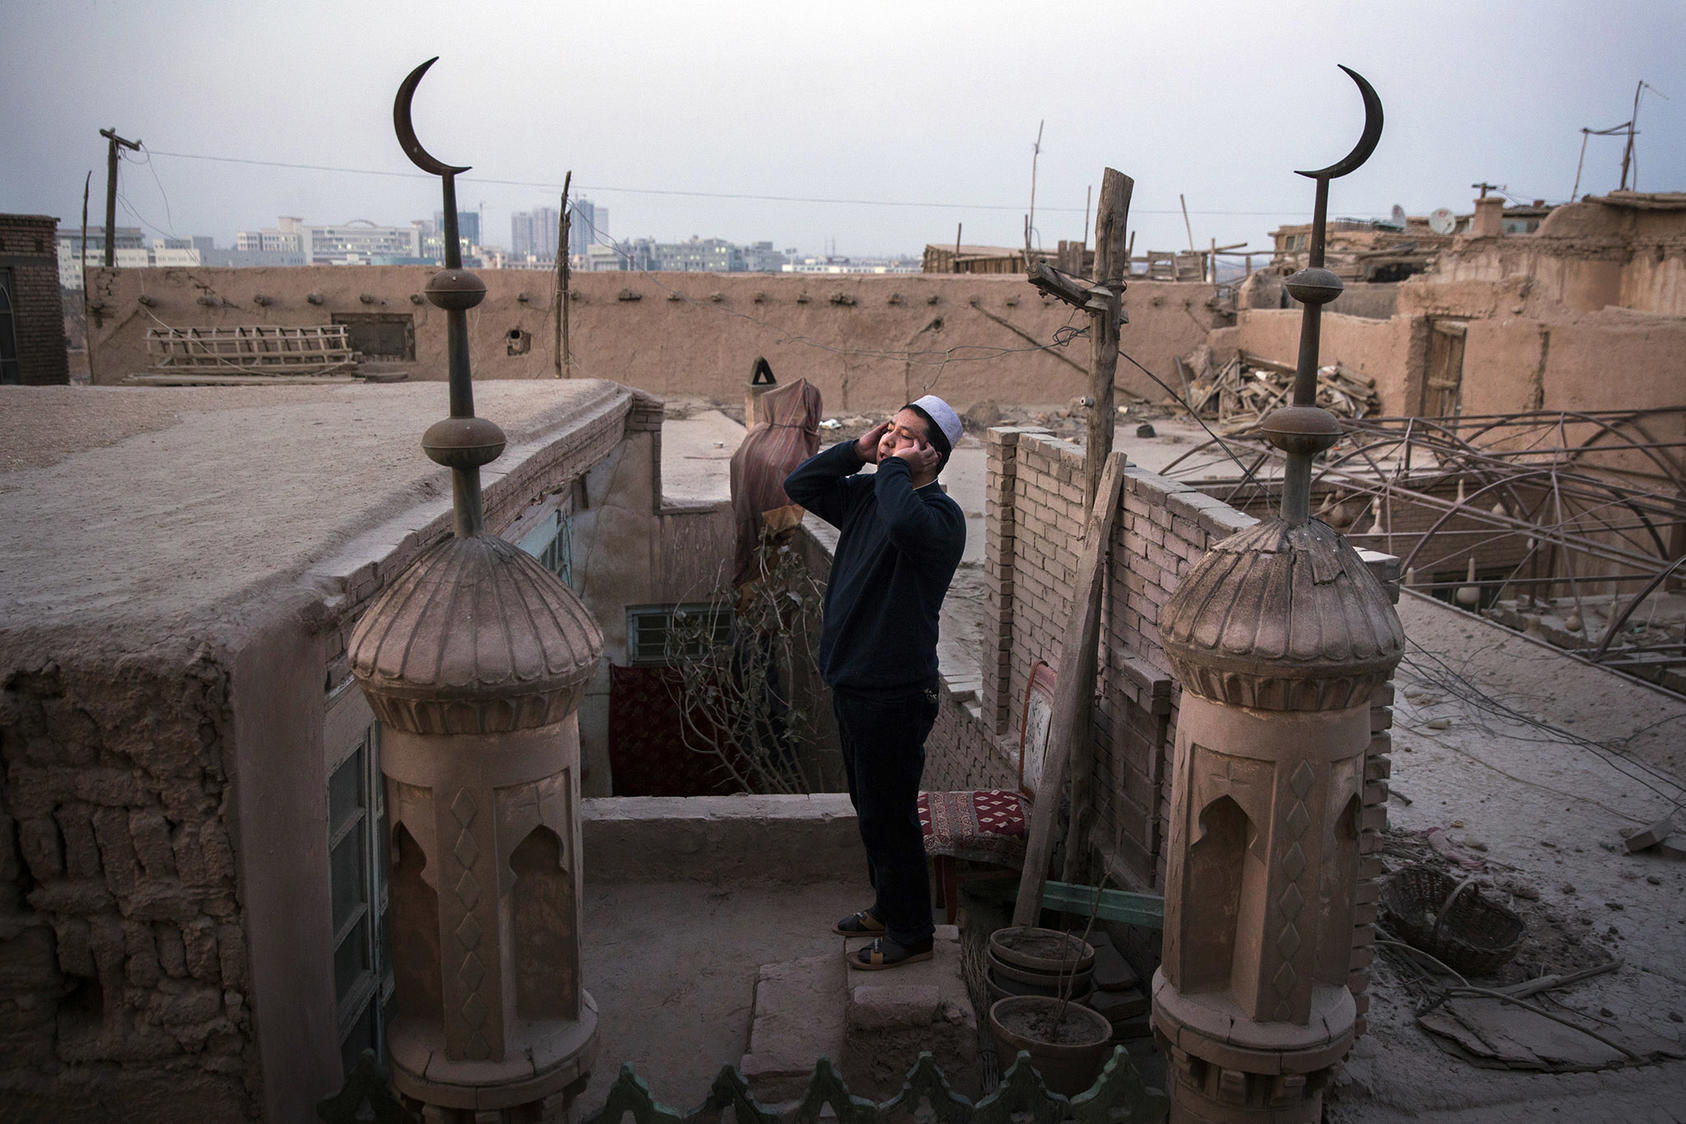 A Uyghur muezzin calls the evening prayer from the rooftop of a mosque in Kashgar, China. Documented evidence of human rights abuses in China’s Xinjiang region has painted a clear picture that Beijing is perpetrating mass atrocities against Uyghurs and other Turkic Muslim ethnic groups. (Adam Dean/The New York Times)